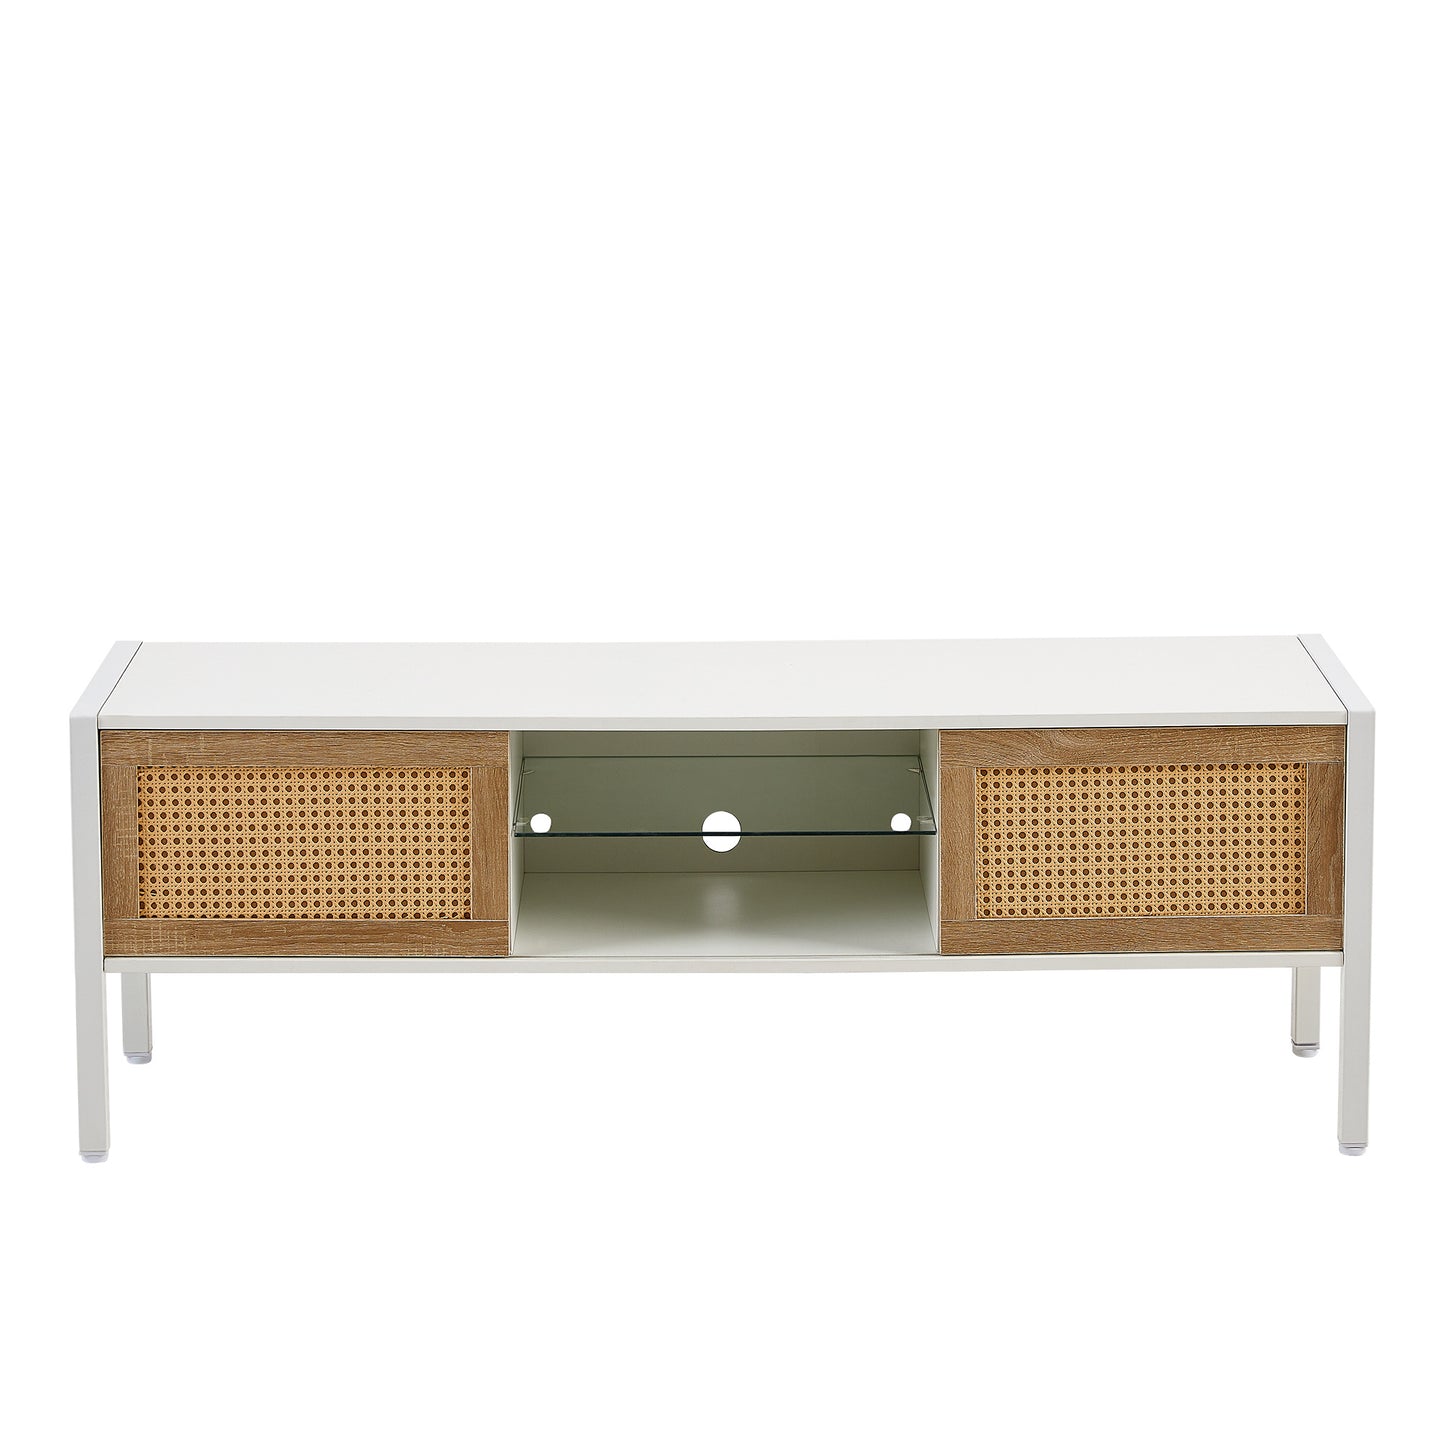 Rattan TV cabinet with variable color light strip.